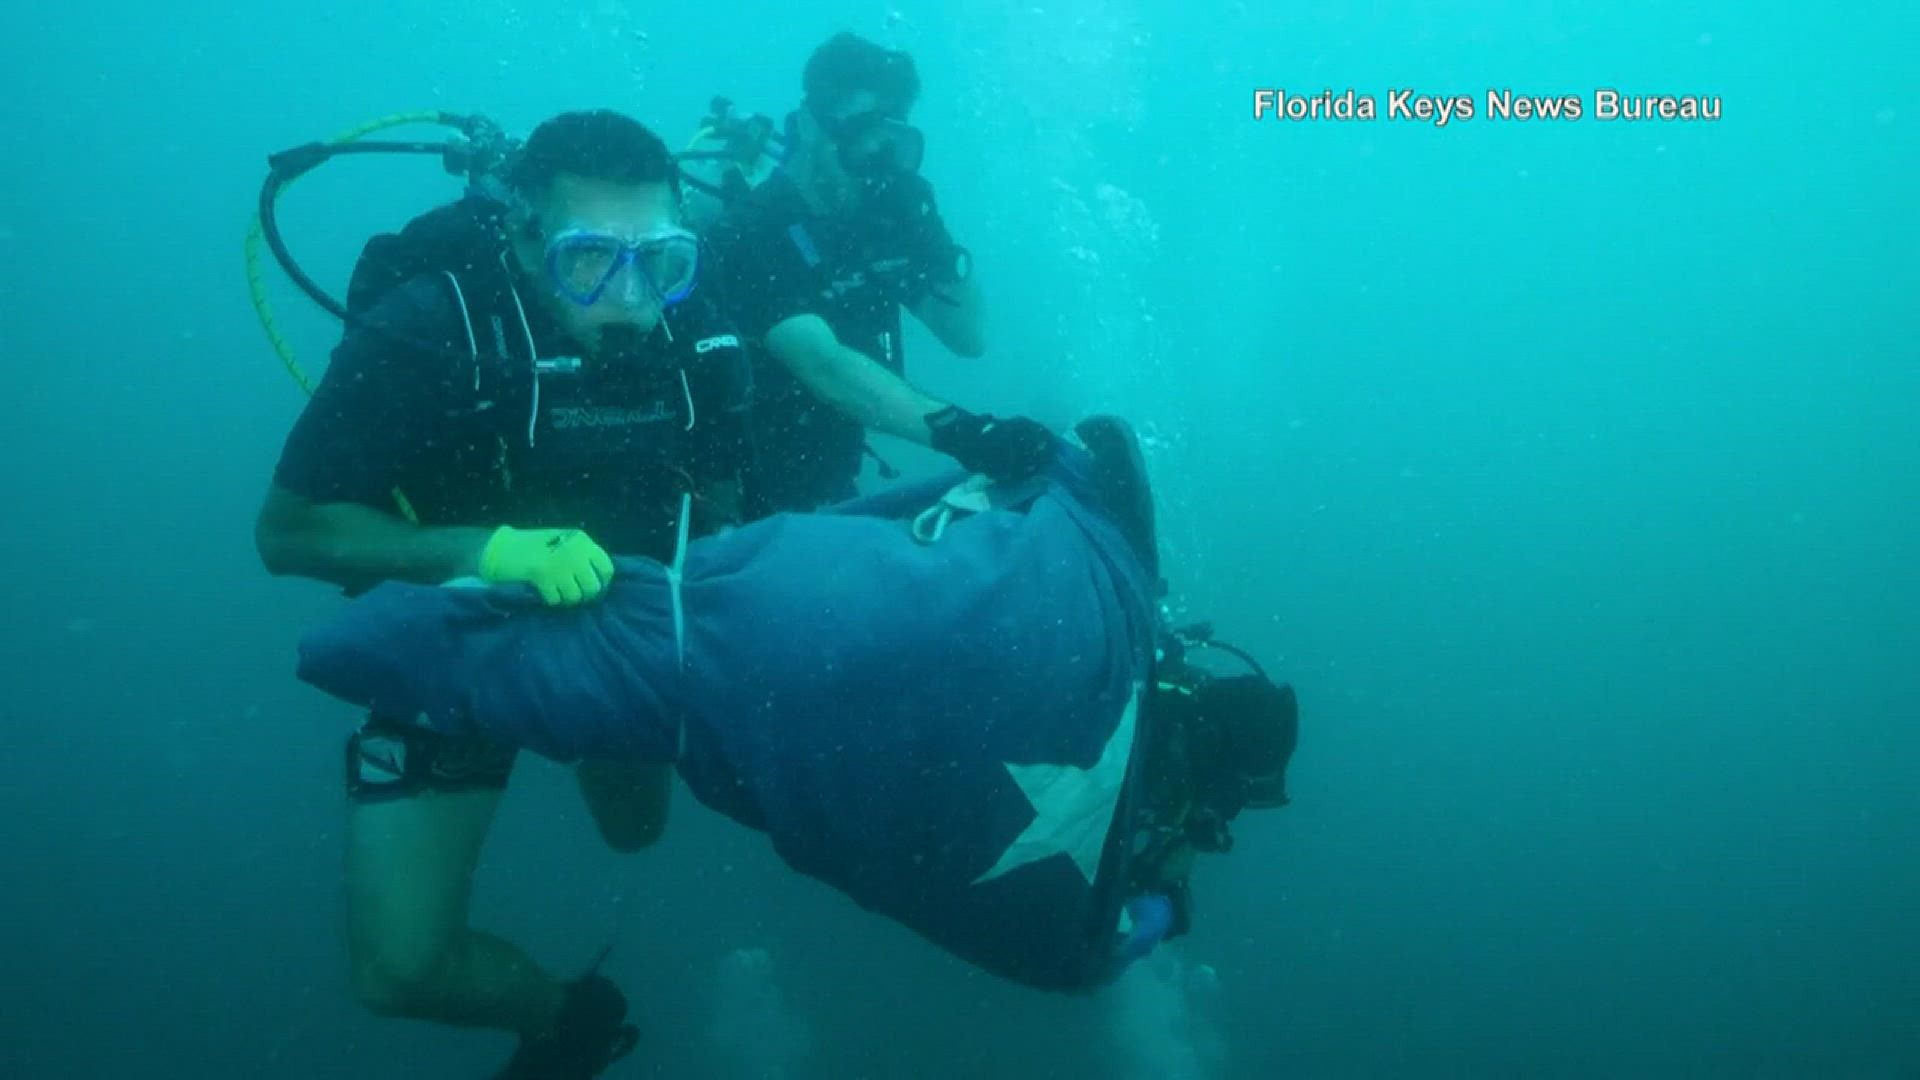 Divers placed a giant American flag underwater at the Florida Keys National Marine Sanctuary to commemorate the 20th anniversary of the Sept. 11 terrorist attacks.